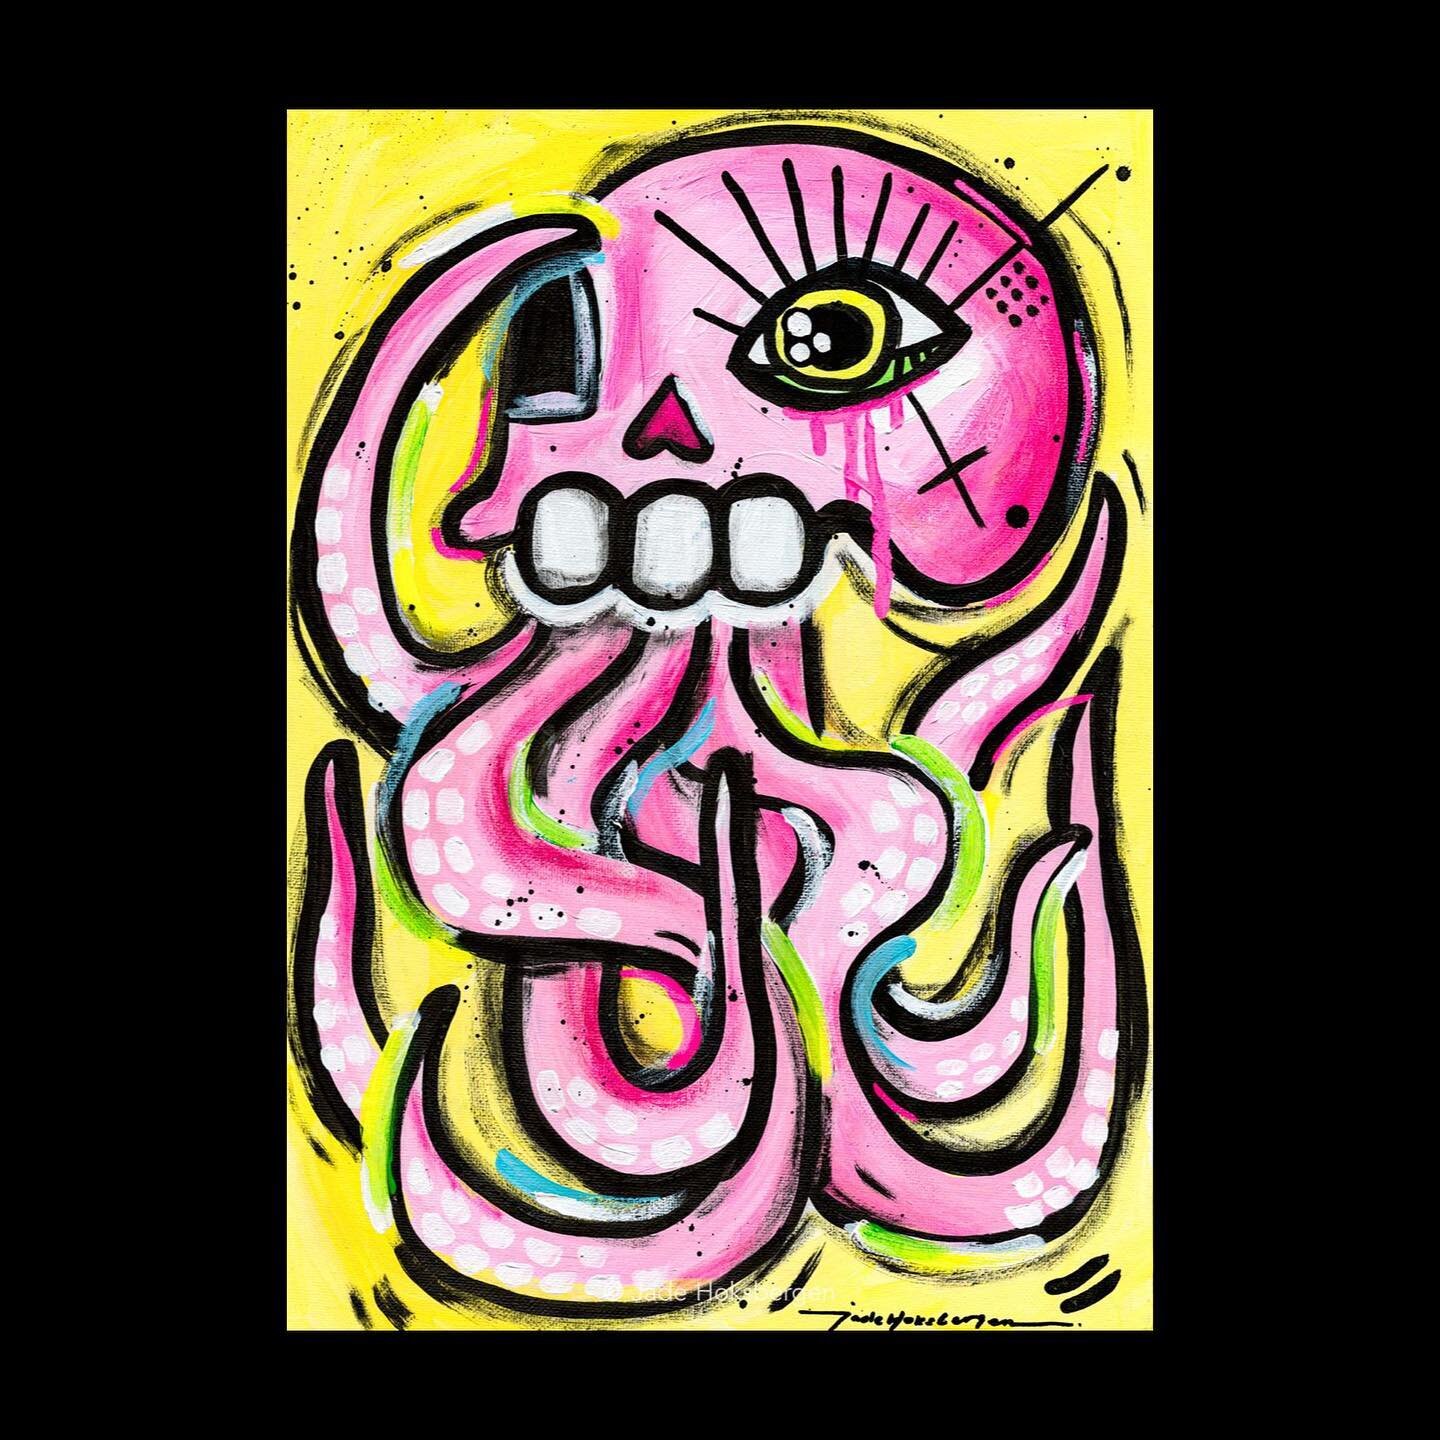 &ldquo;SKULLOCTOPUS, pink on citrus&rdquo;
42 x 30 cm 
more info can be found on the link in my bio. X